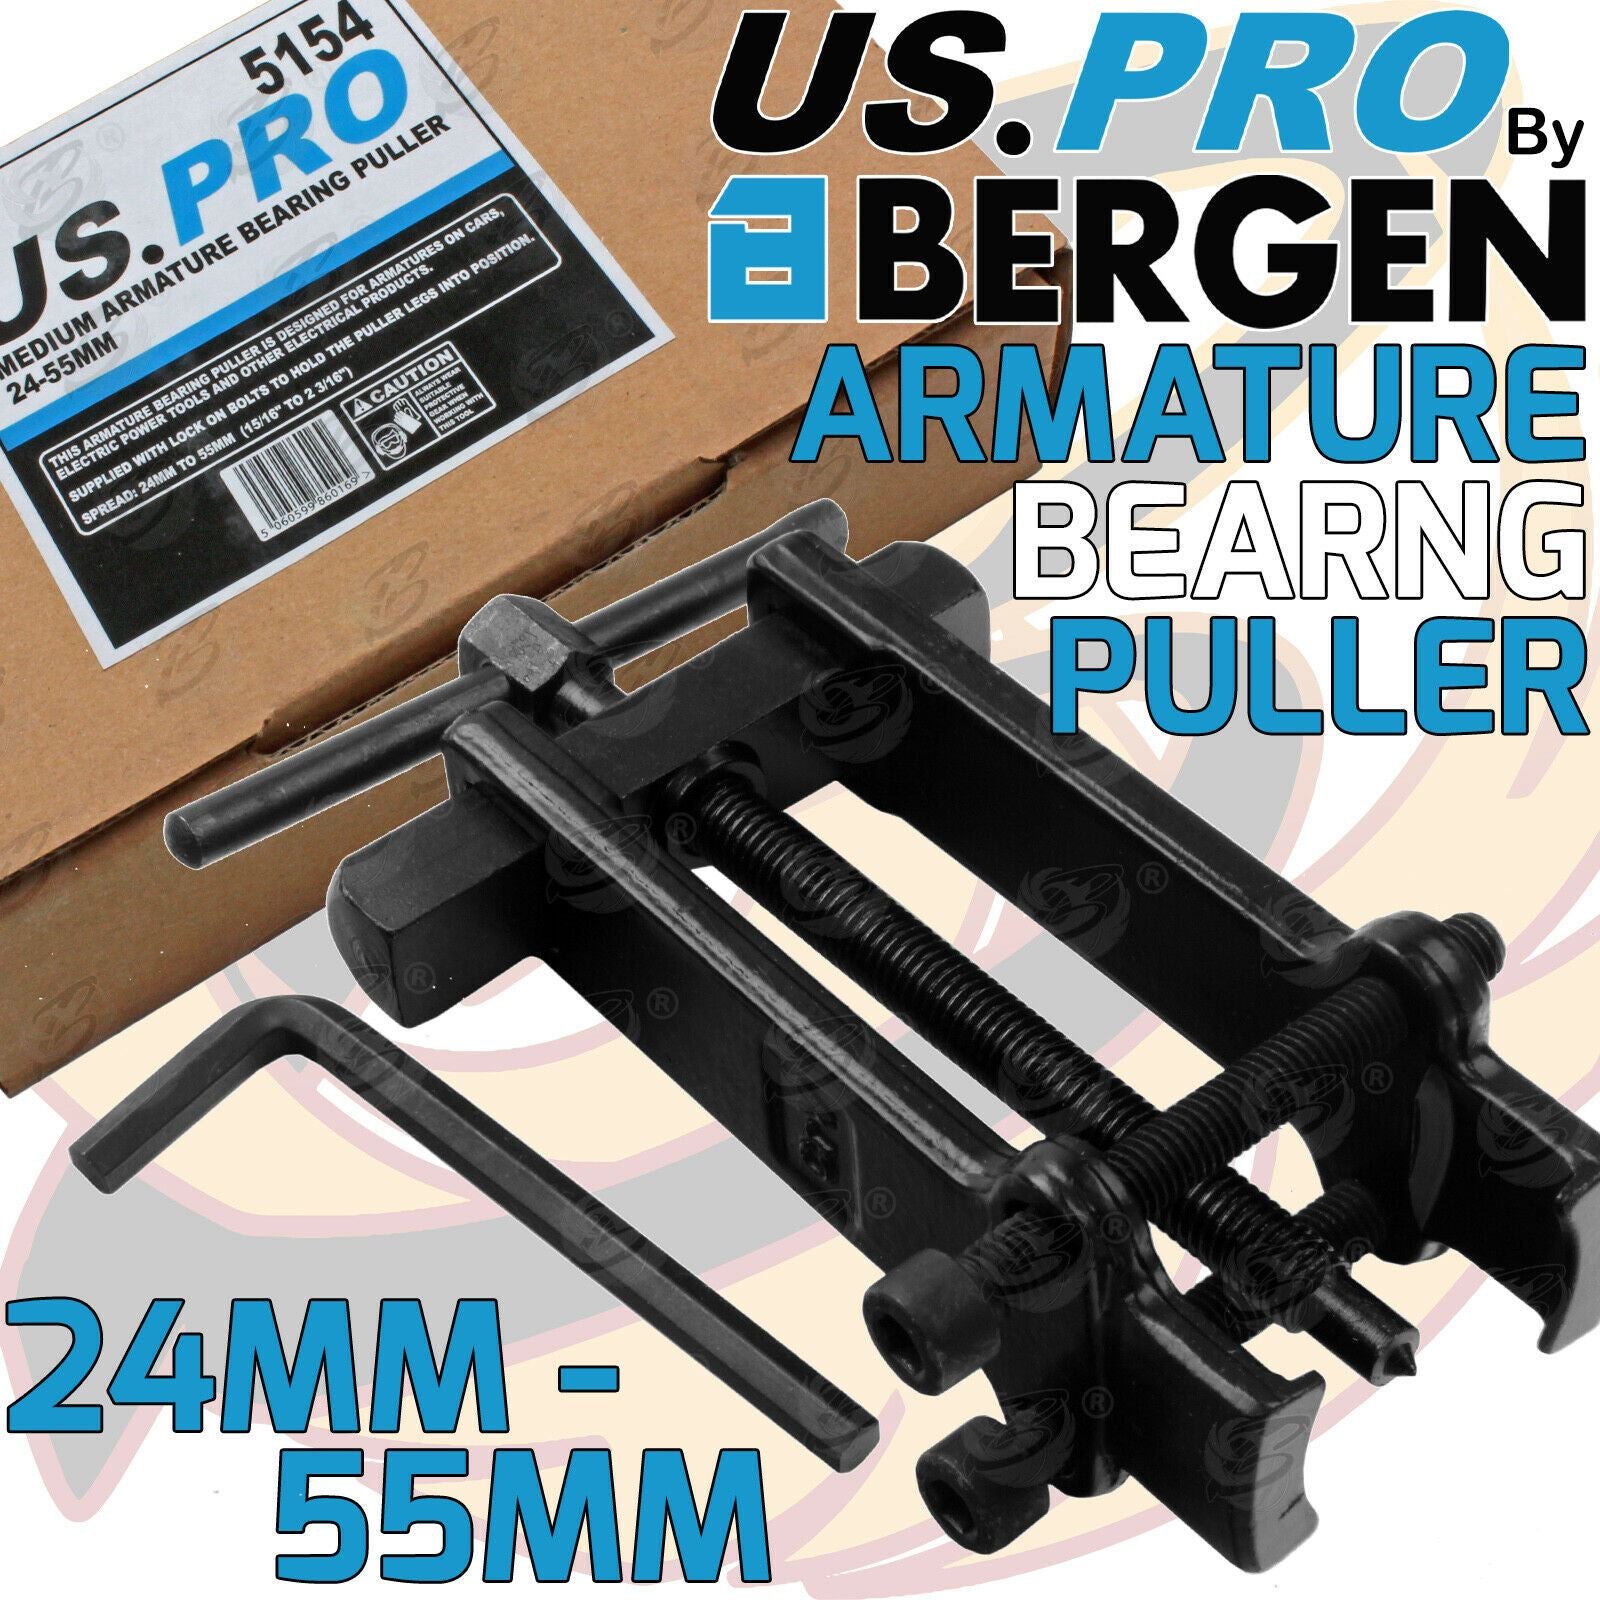 US PRO ARMATURE BEARING PULLER 24MM - 55MM